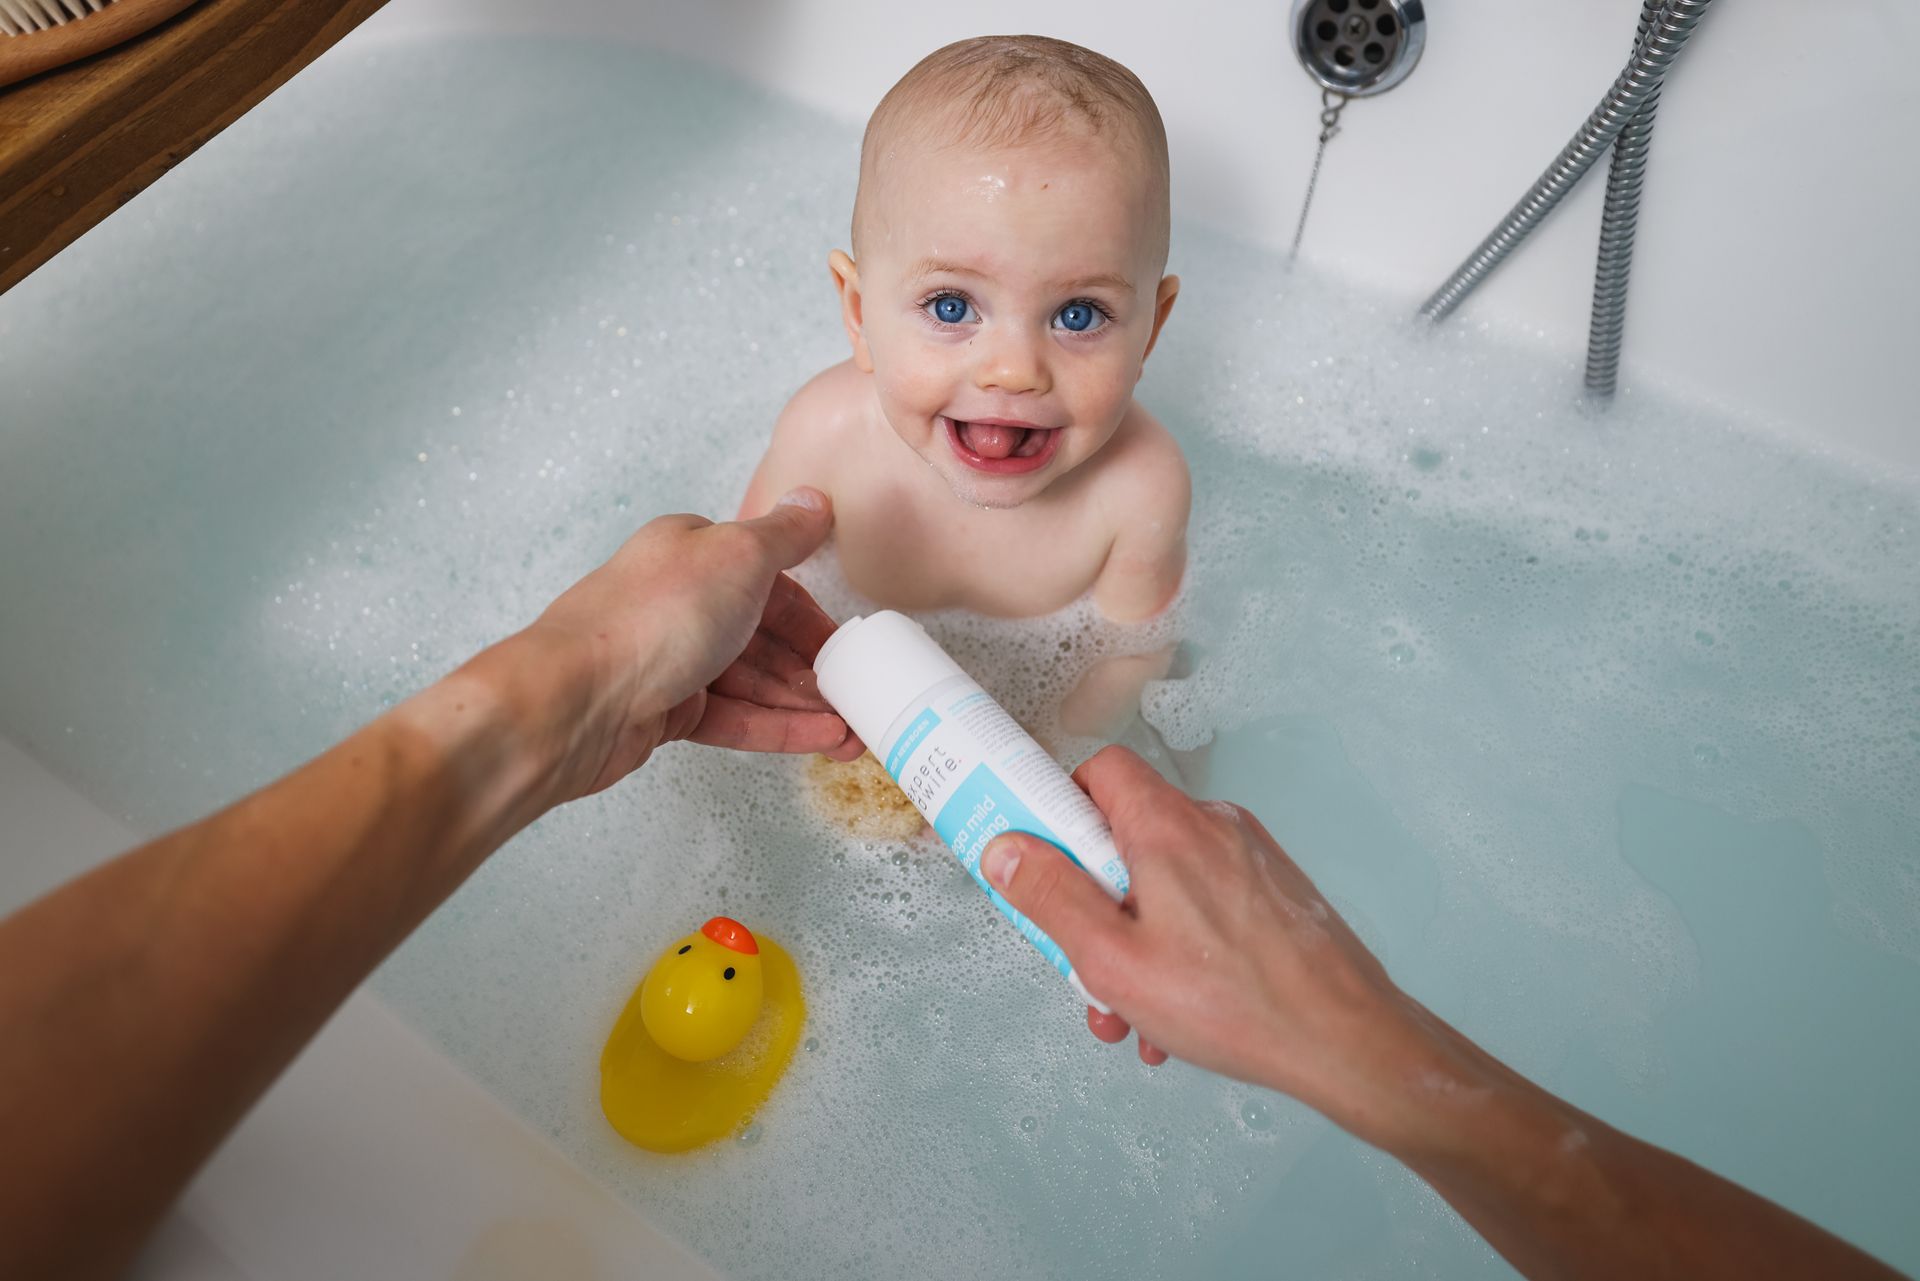 a baby is taking a bath in a bathtub while a person holds a bottle of shampoo .